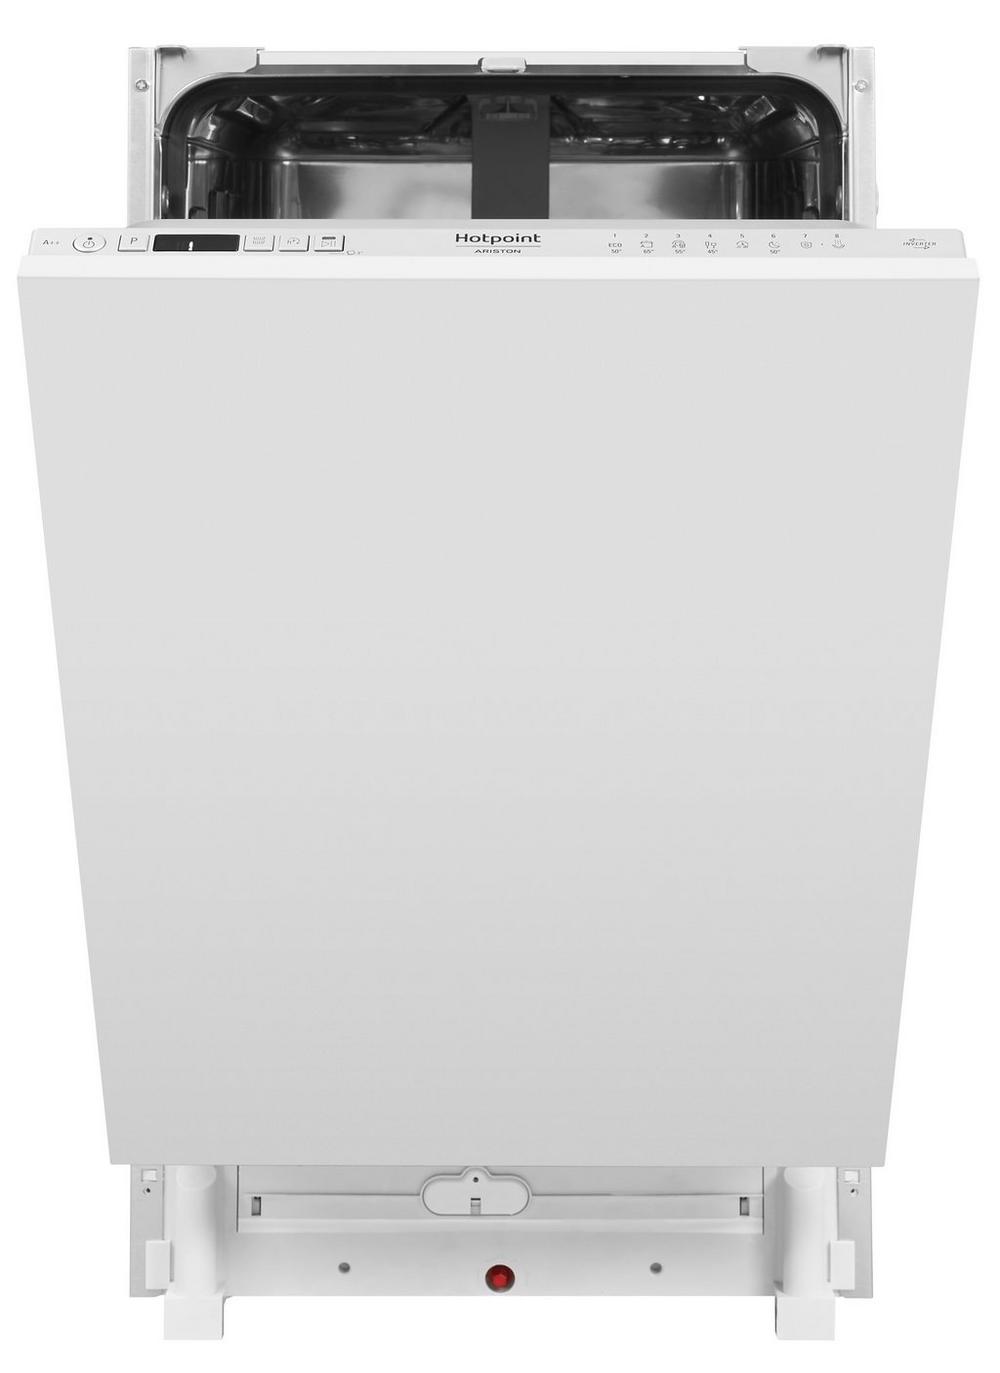 Hotpoint HSICIH4798BI Integrated Slimline Dishwasher - Stainless Steel - A++ Energy Rated